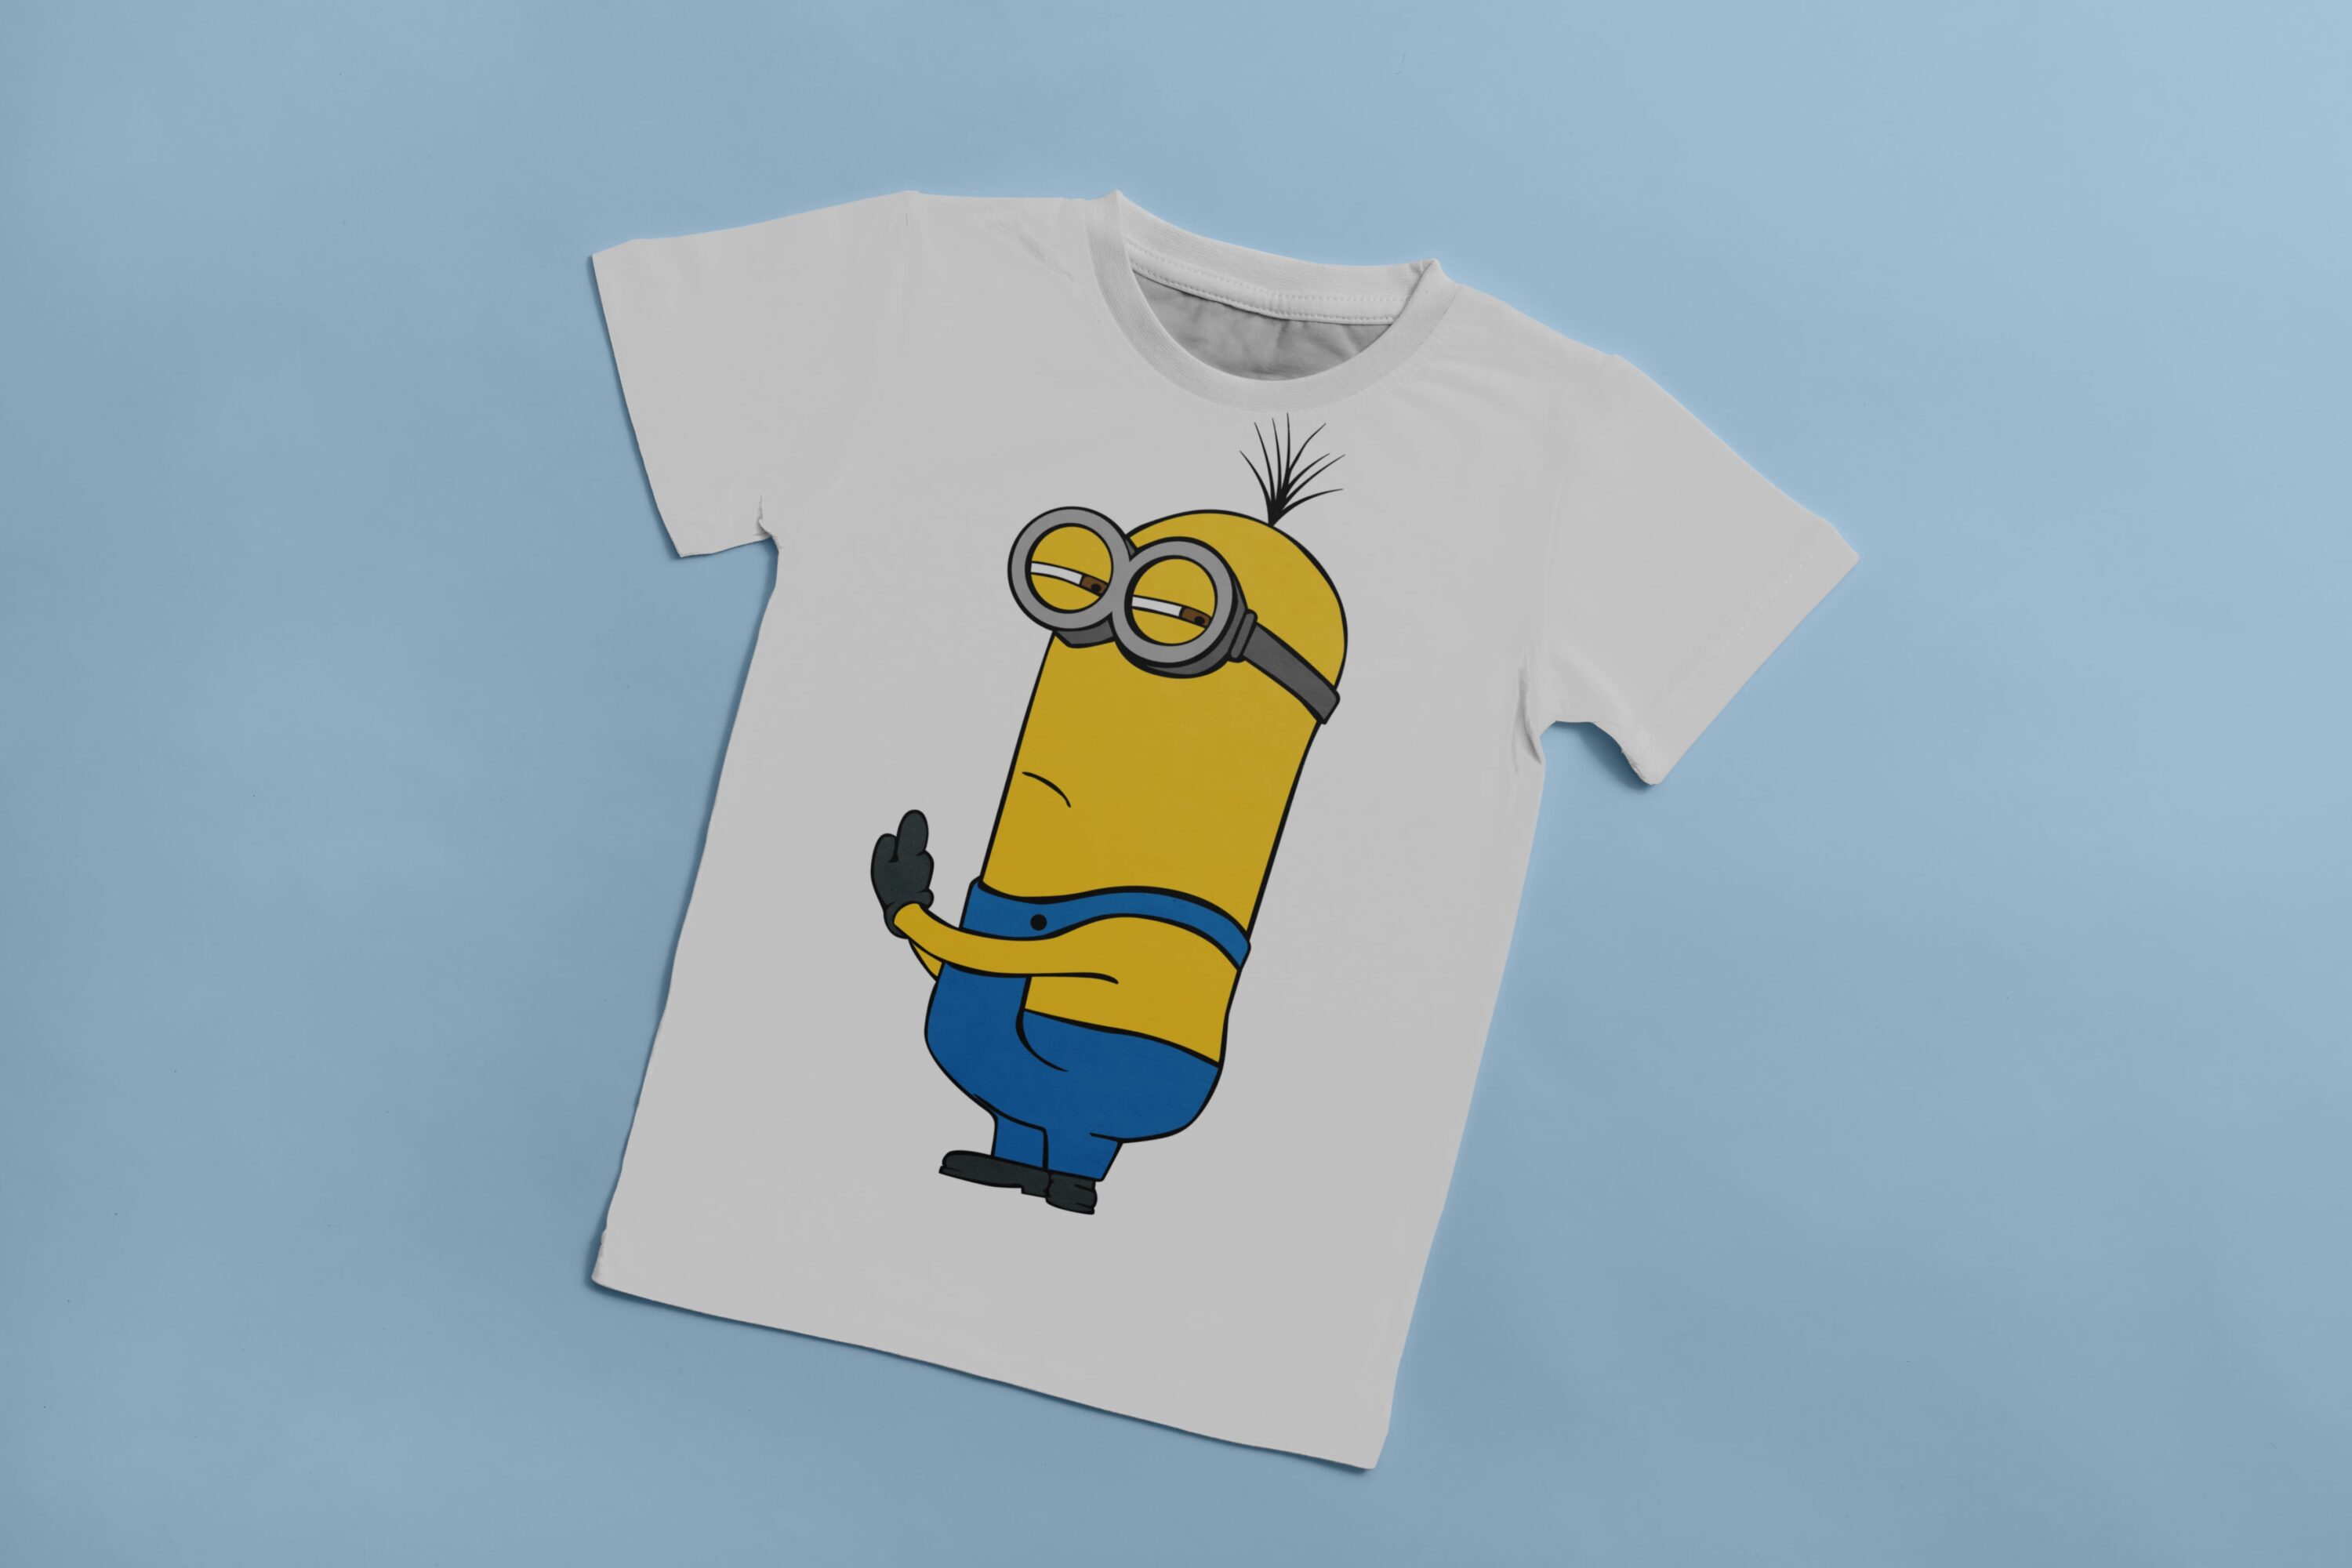 White T-shirt with the image of the offended character - Minion.